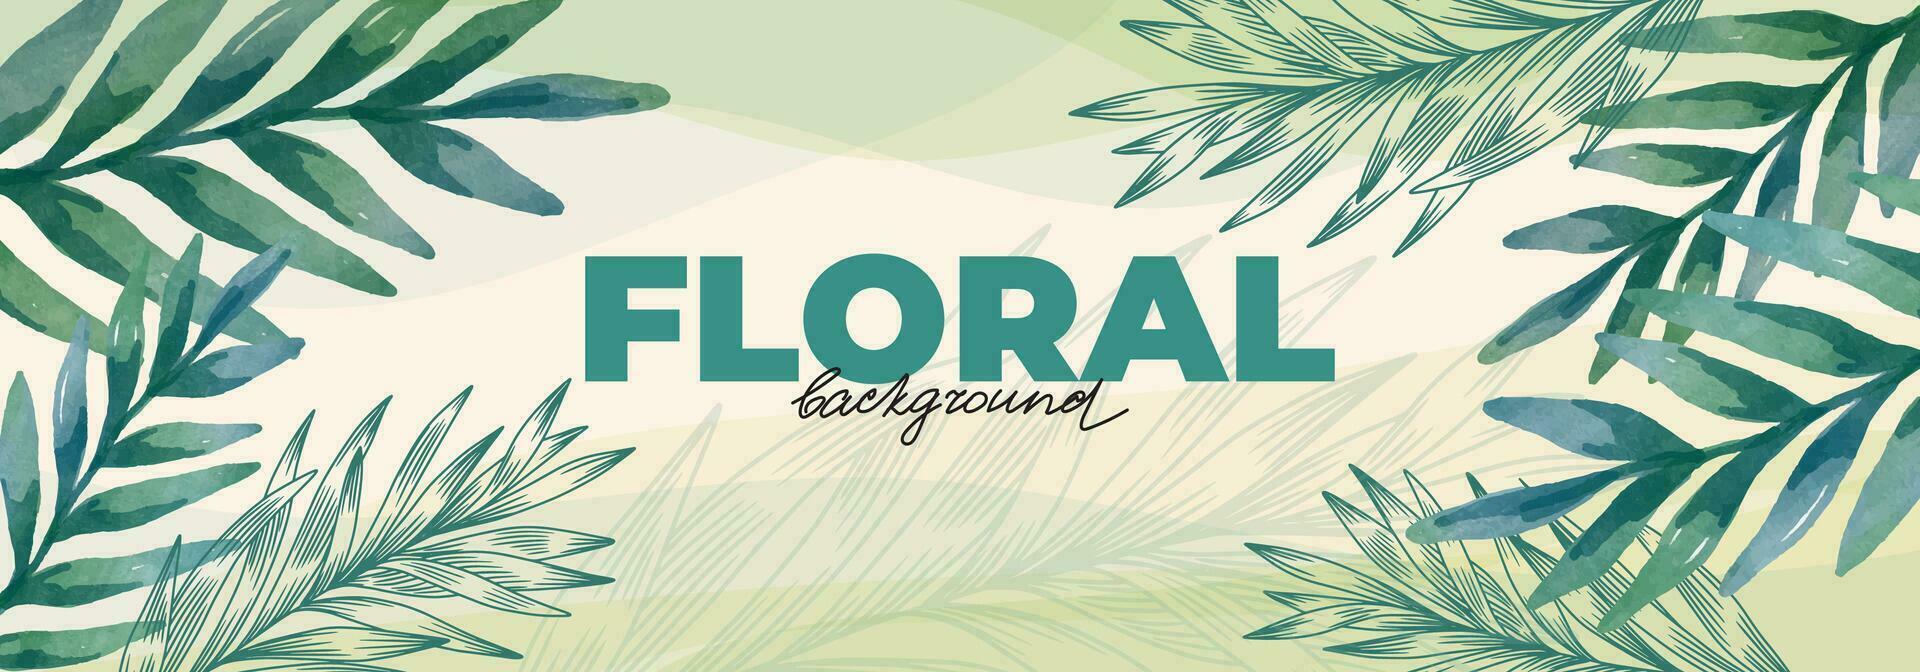 Spring background with watercolor tropical leaves for banner design. Template with fern branches, stems, palm leaf, floral linear elements vector